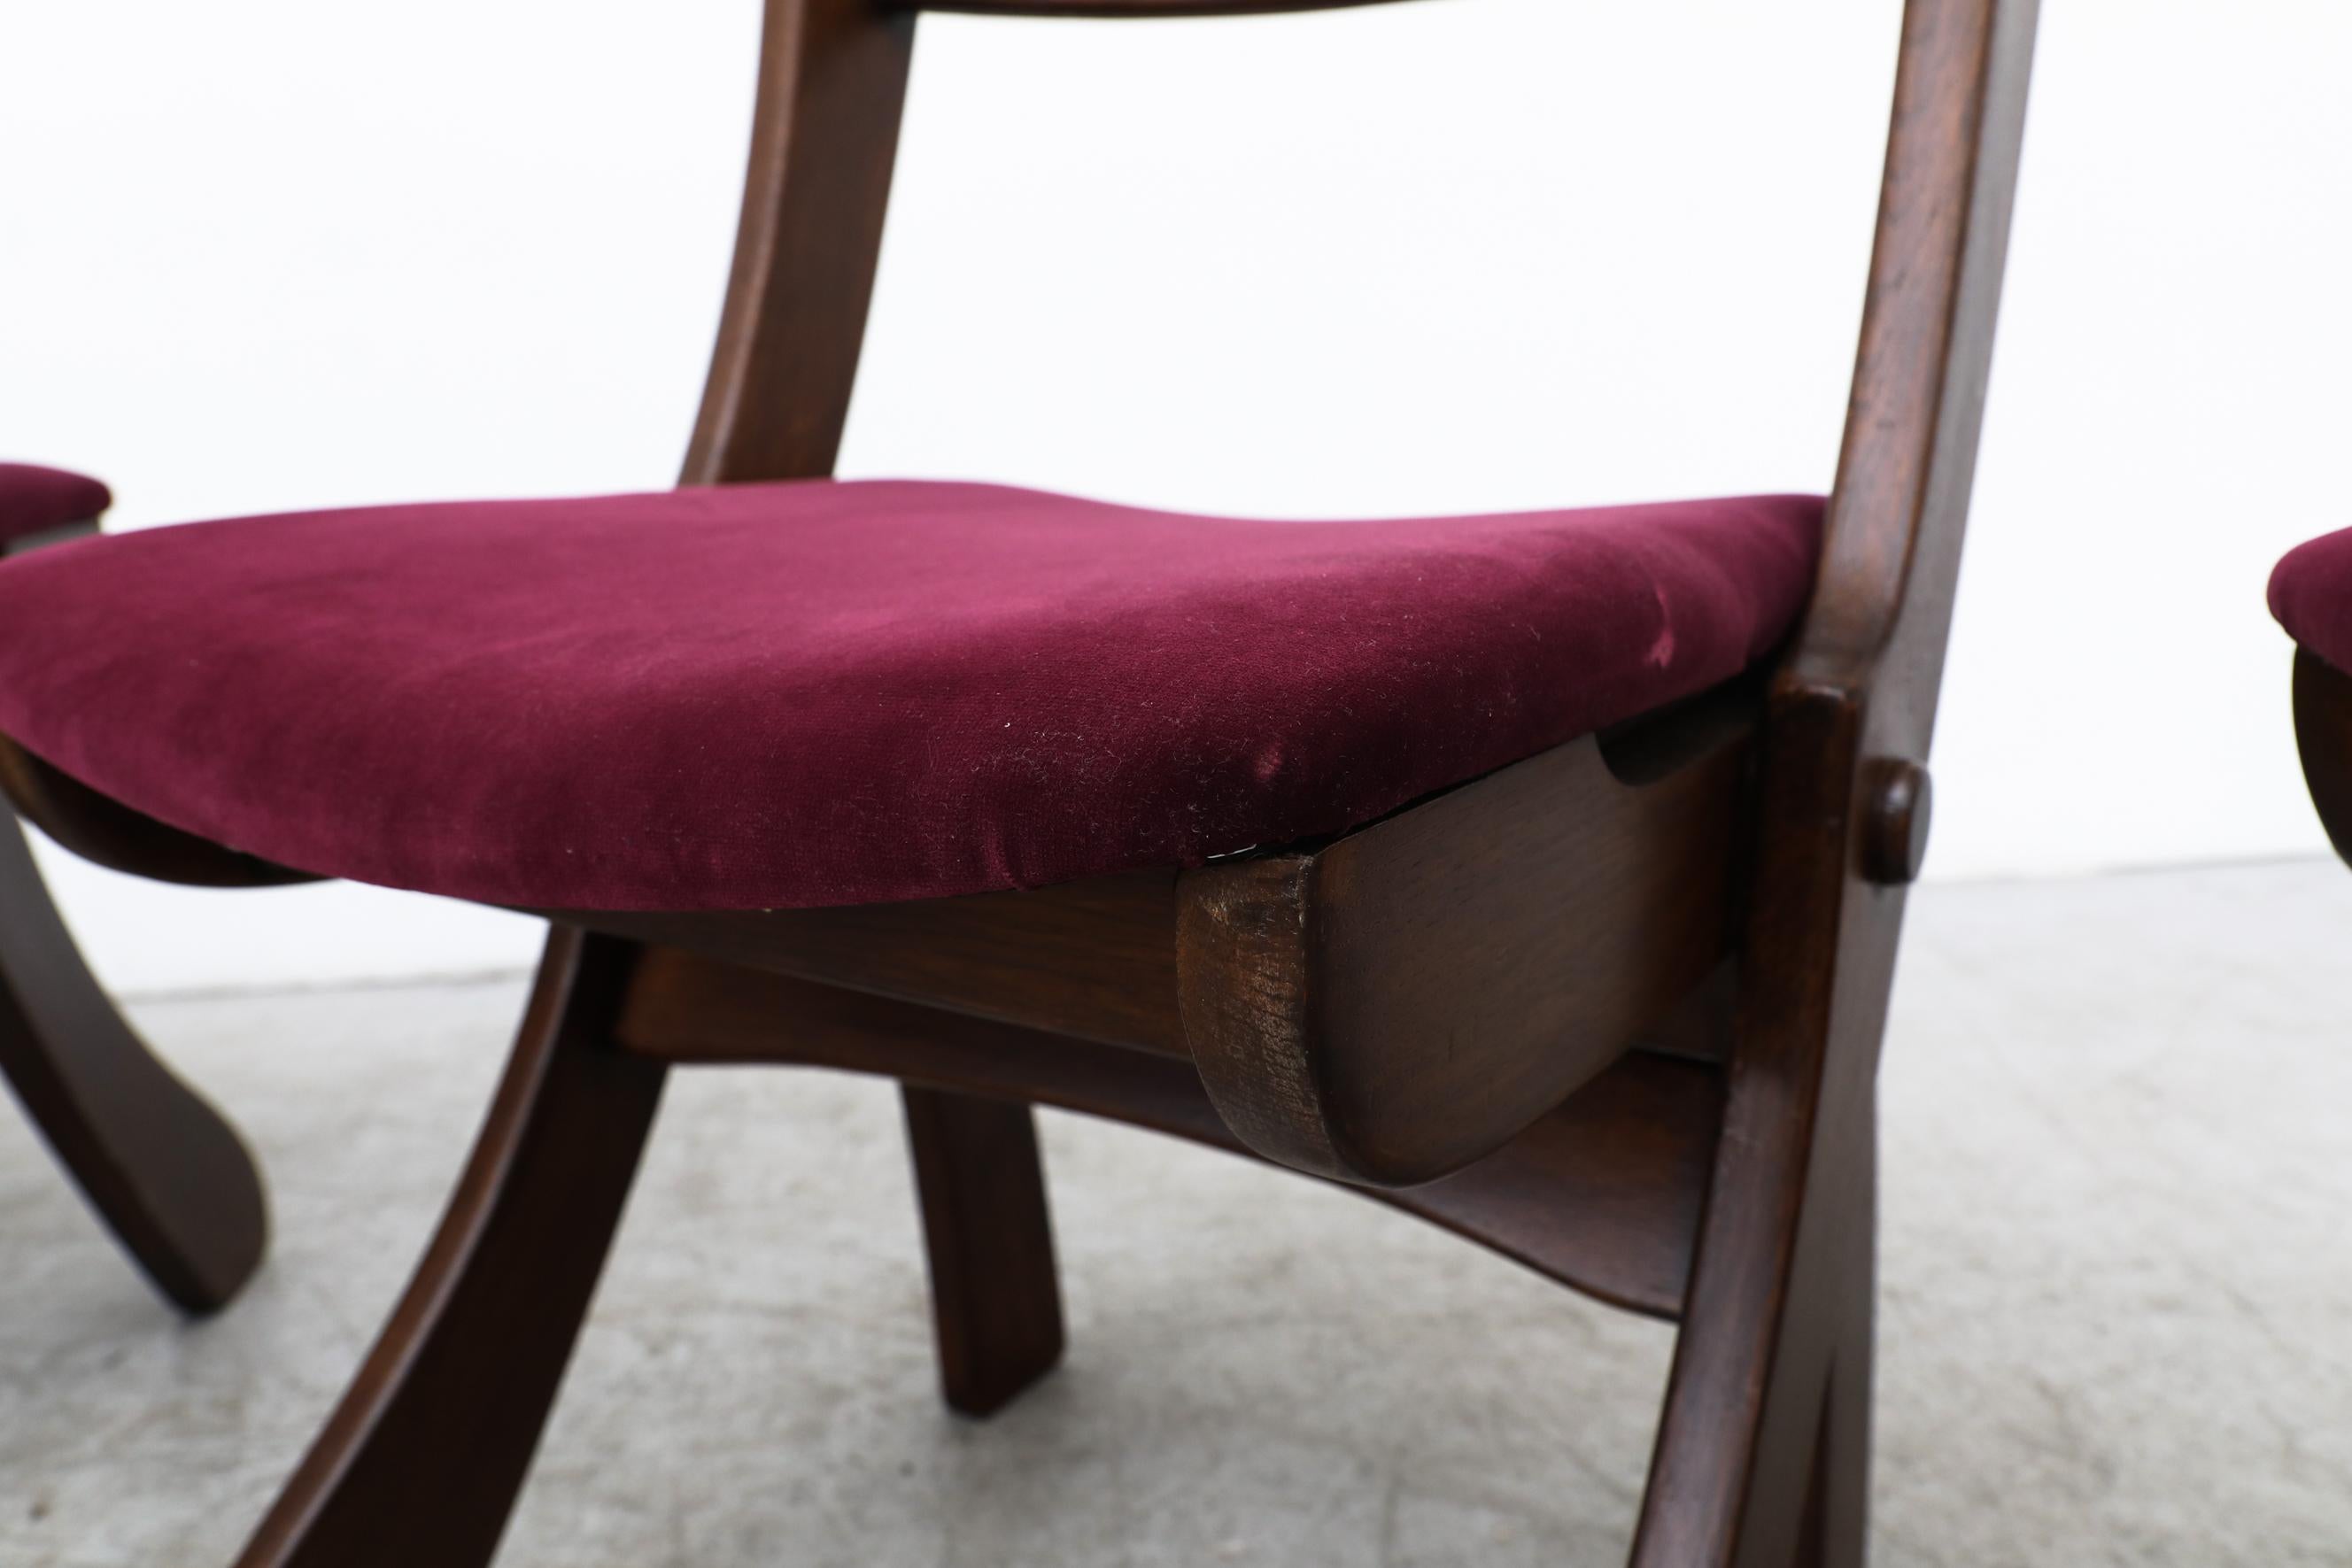 Set of 4 Dark Stained Brutalist Razor Back Chairs with New Burgundy Velvet Seats For Sale 10